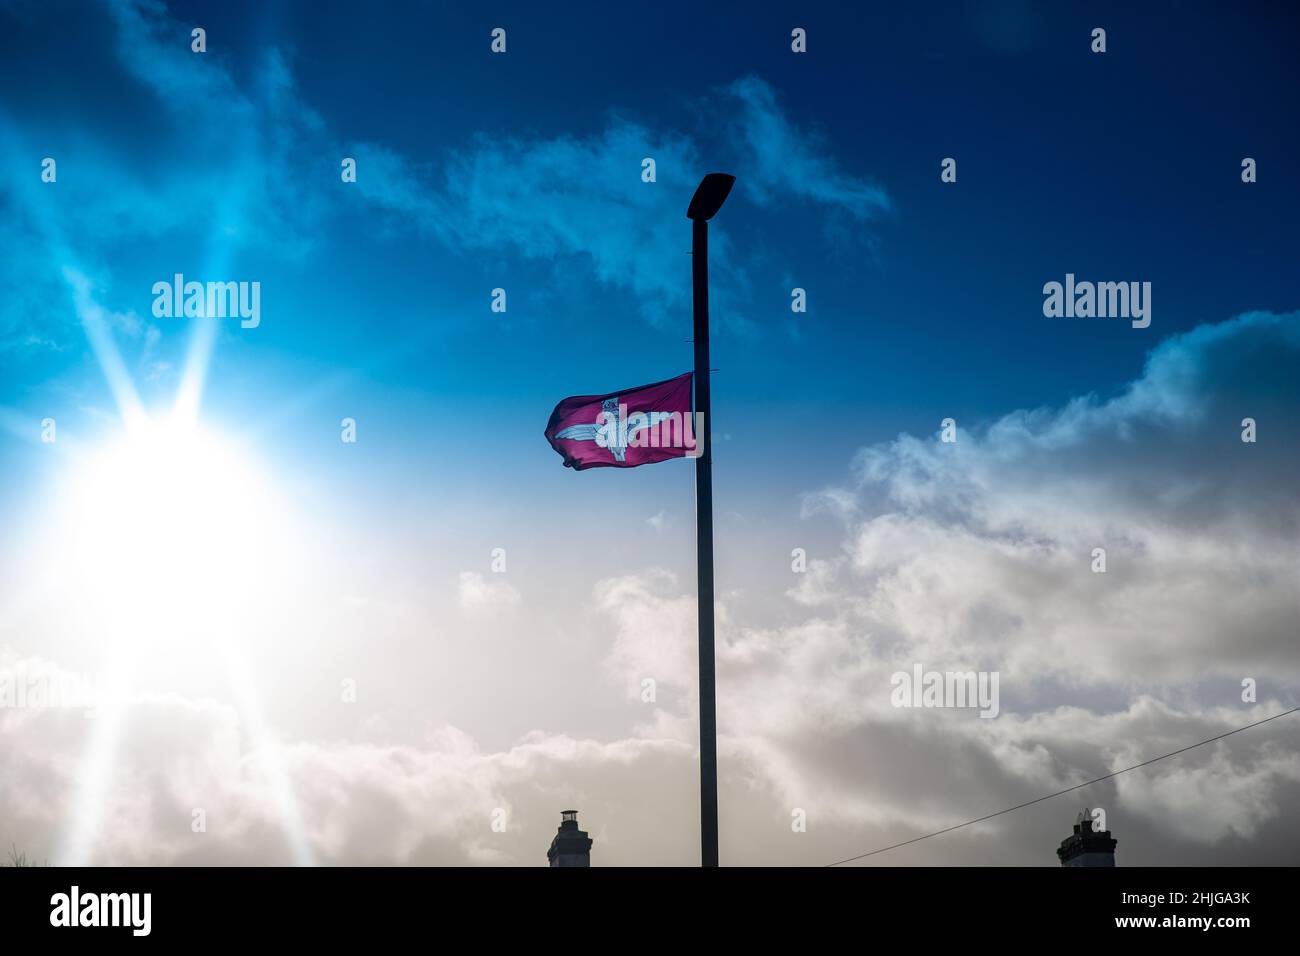 Drumahoe County Derry, UK. 29th Jan, 2022. Parachute Regiment Flags flying in Drumahoe, a town located 3.2 miles out of Derry/Londonderry. It has been seen as insensitive with the 50th Anniversary of Bloody Sunday tomorrow (30th January 2022) Credit: Bonzo/Alamy Live News Stock Photo